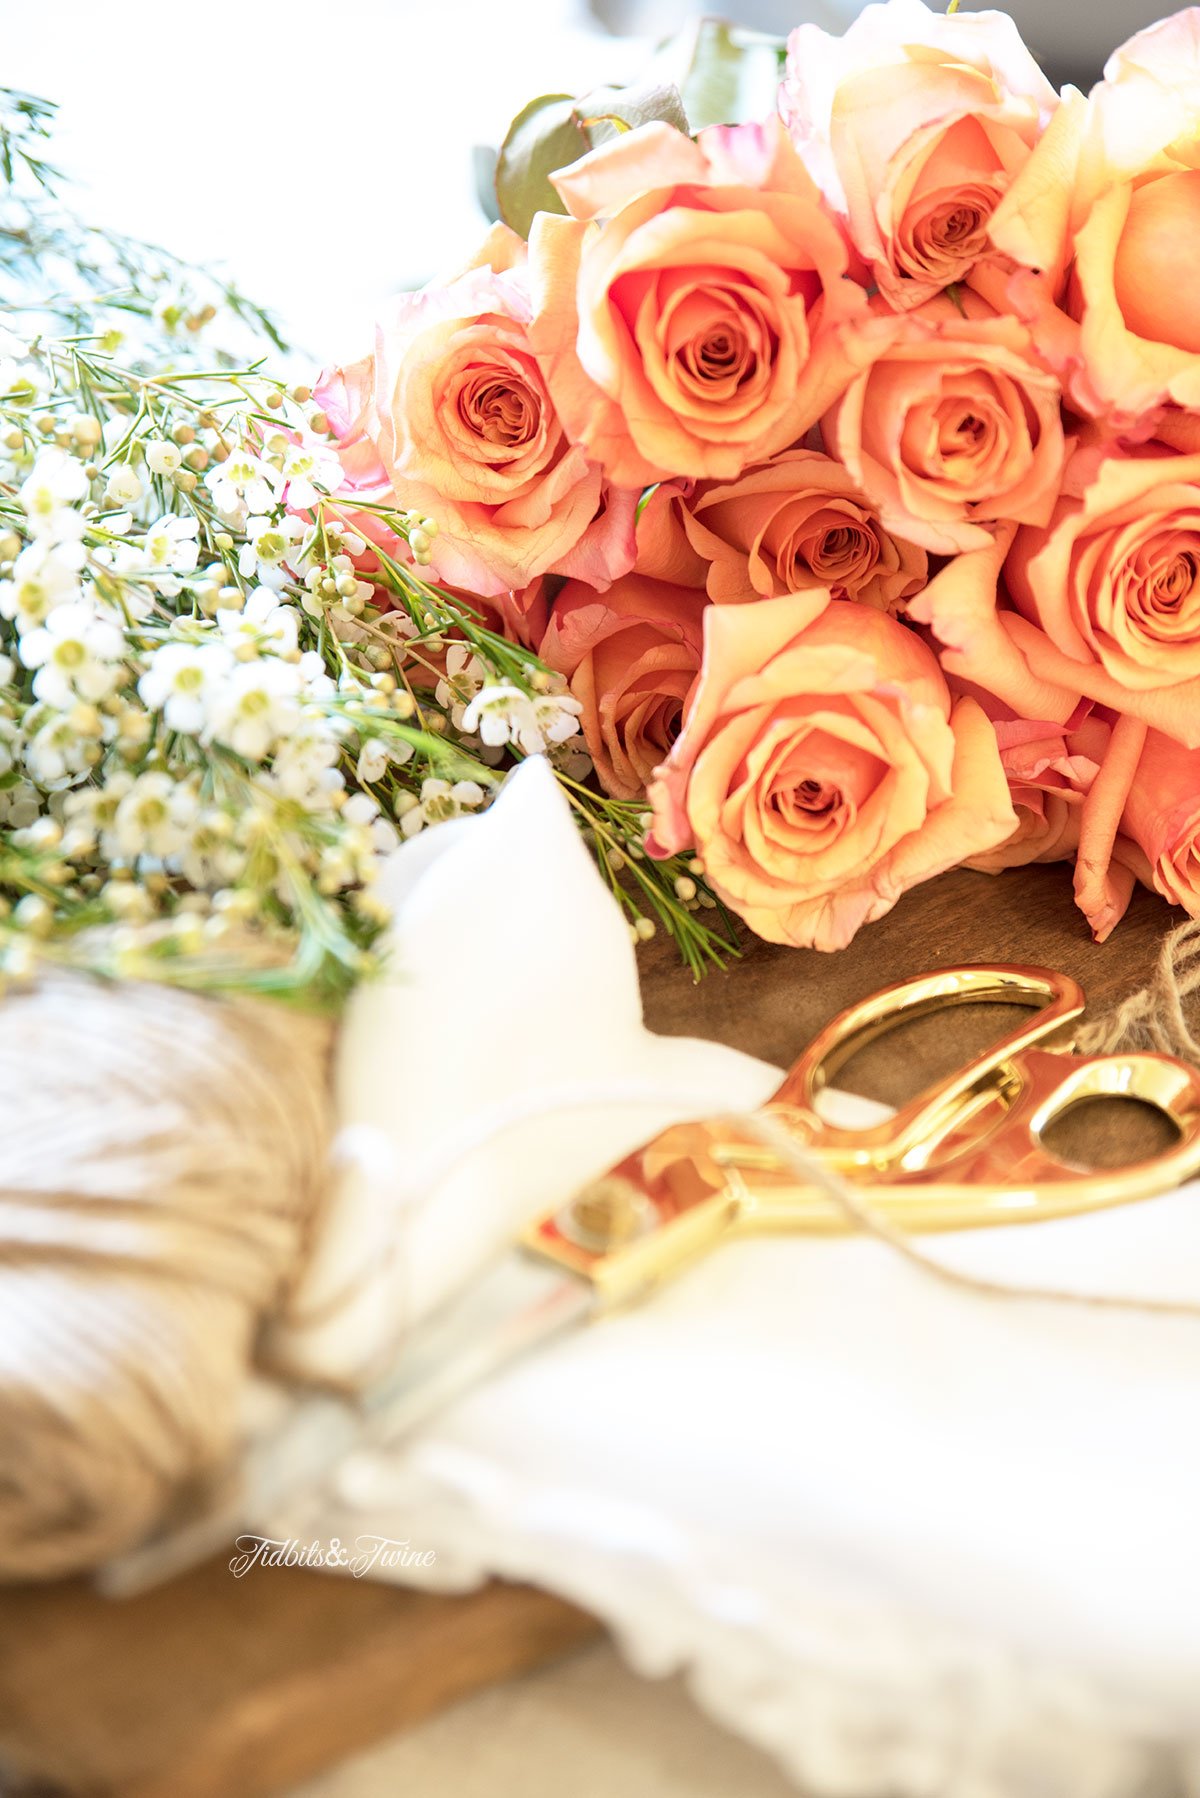 bouquet of peach roses lying on wood table next to gold scissors and white wax flowers